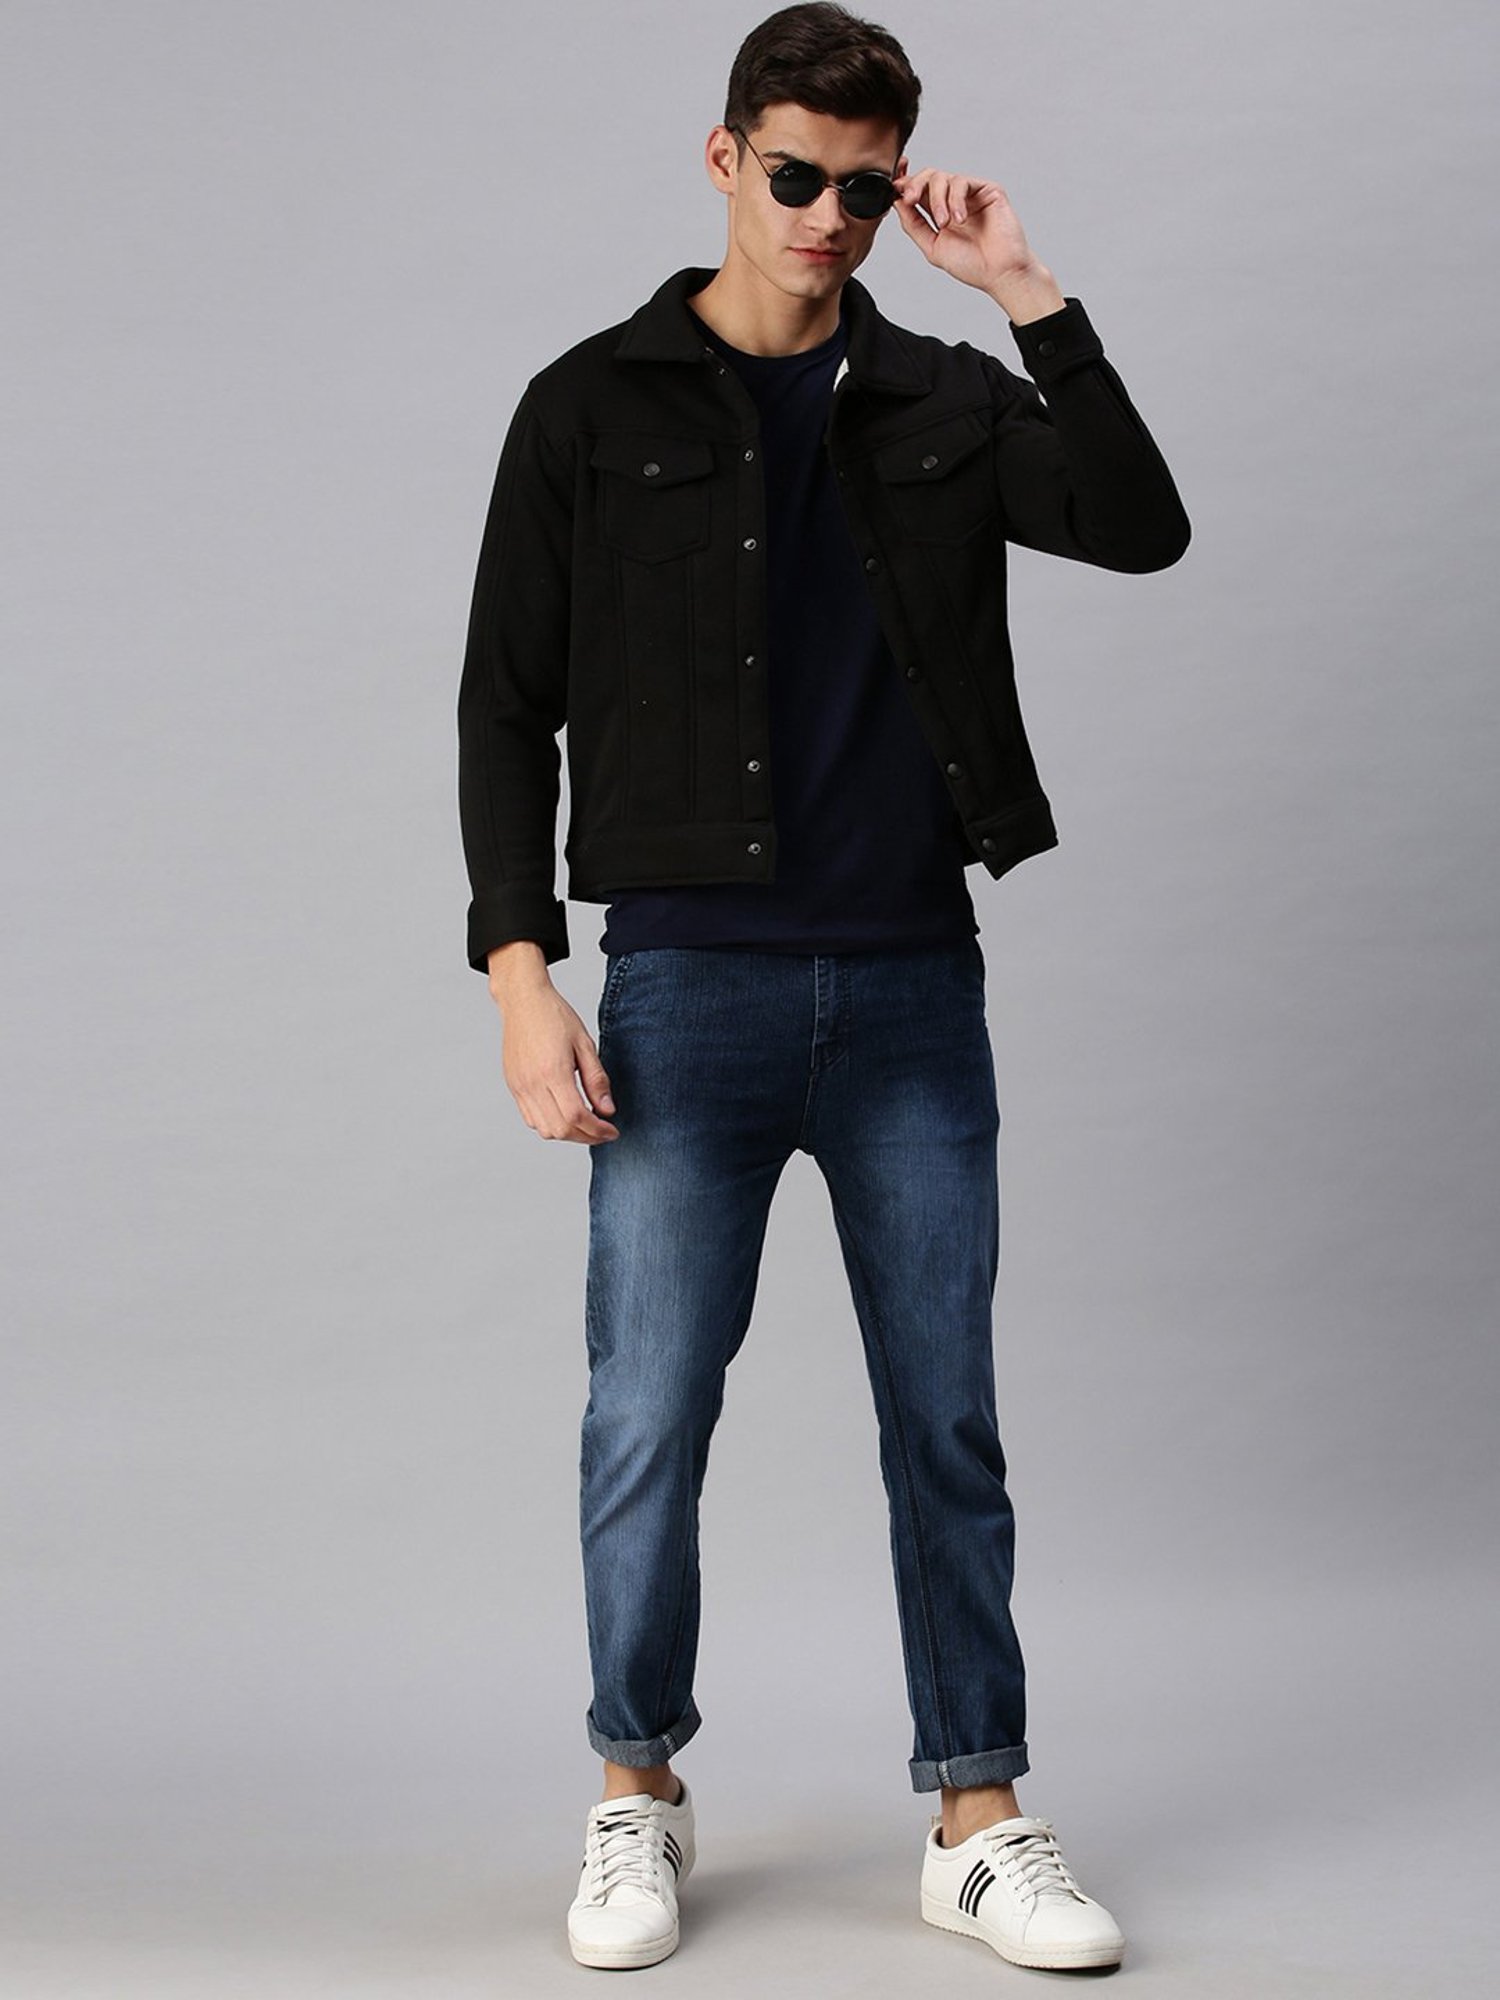 Black Denim Jacket with Black Skinny Jeans Outfits For Men (25 ideas &  outfits) | Lookastic